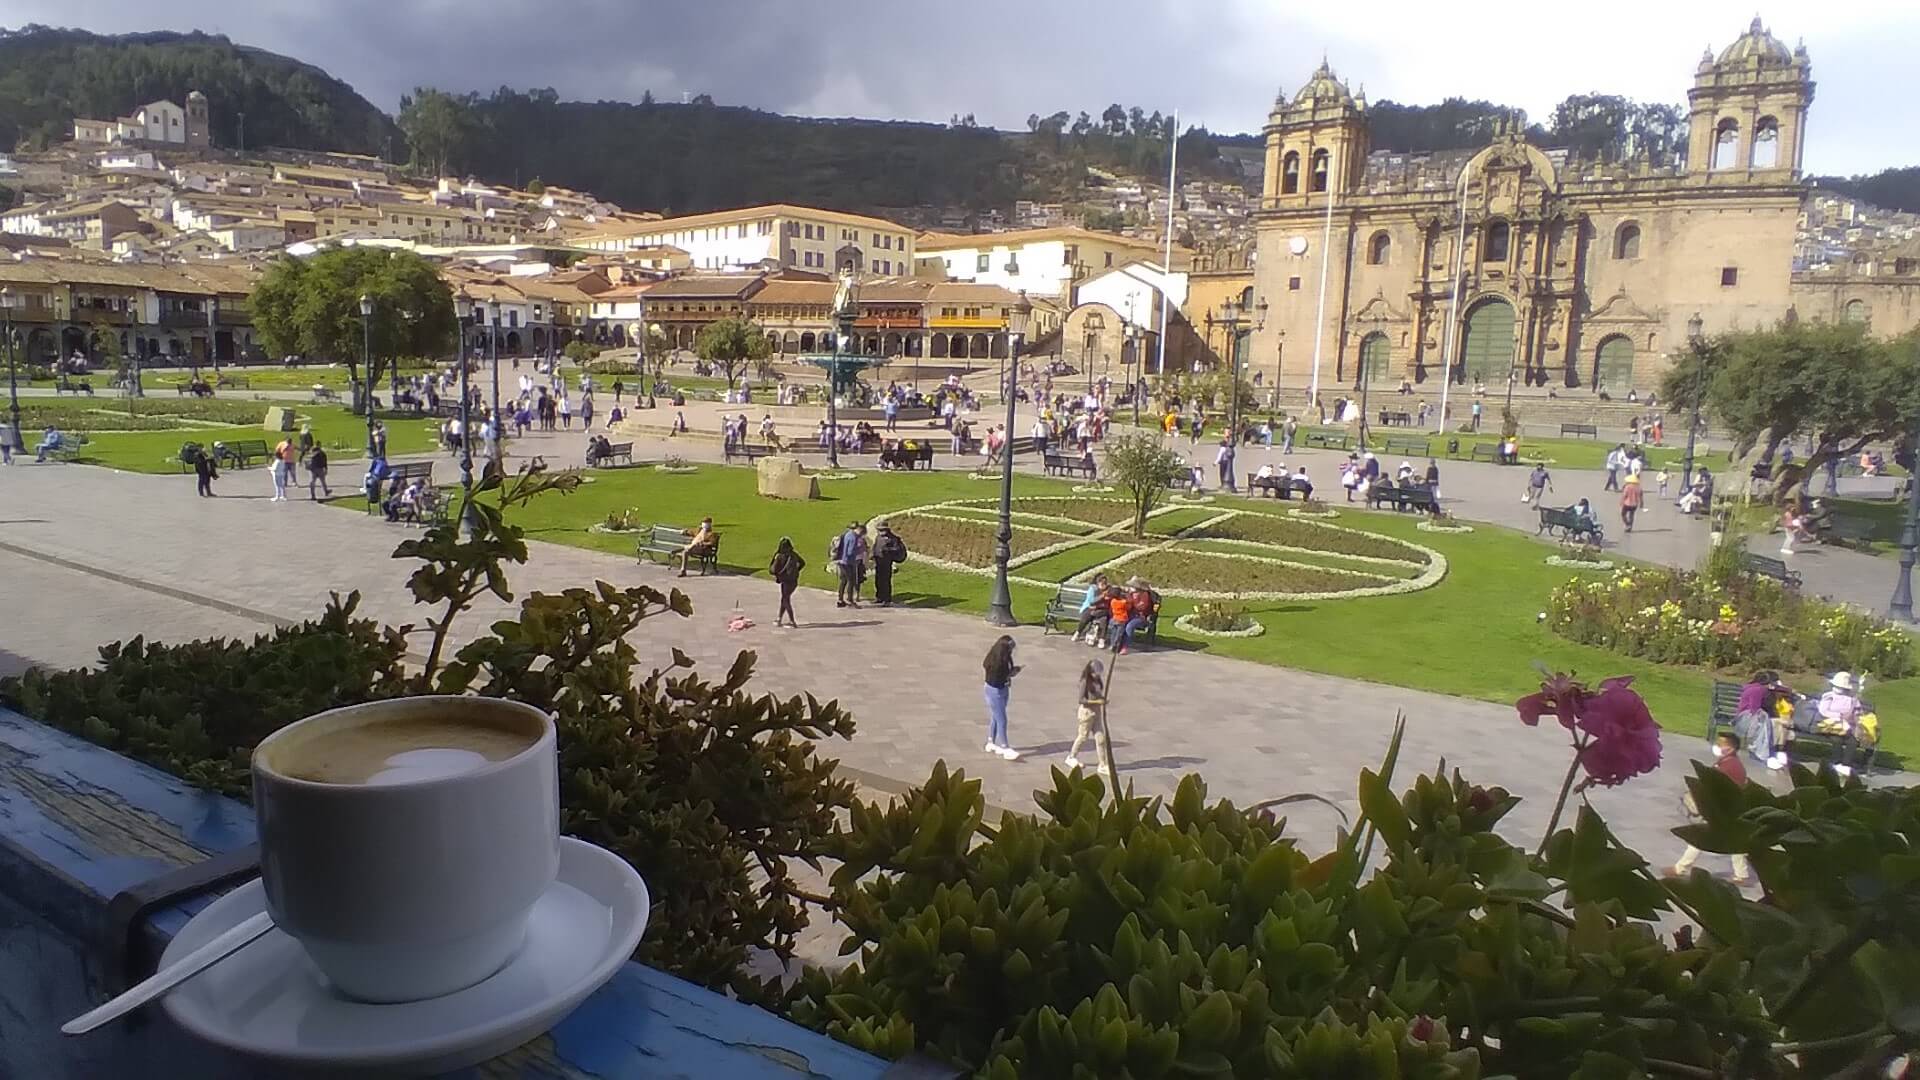 View of the main square in Cusco from a café